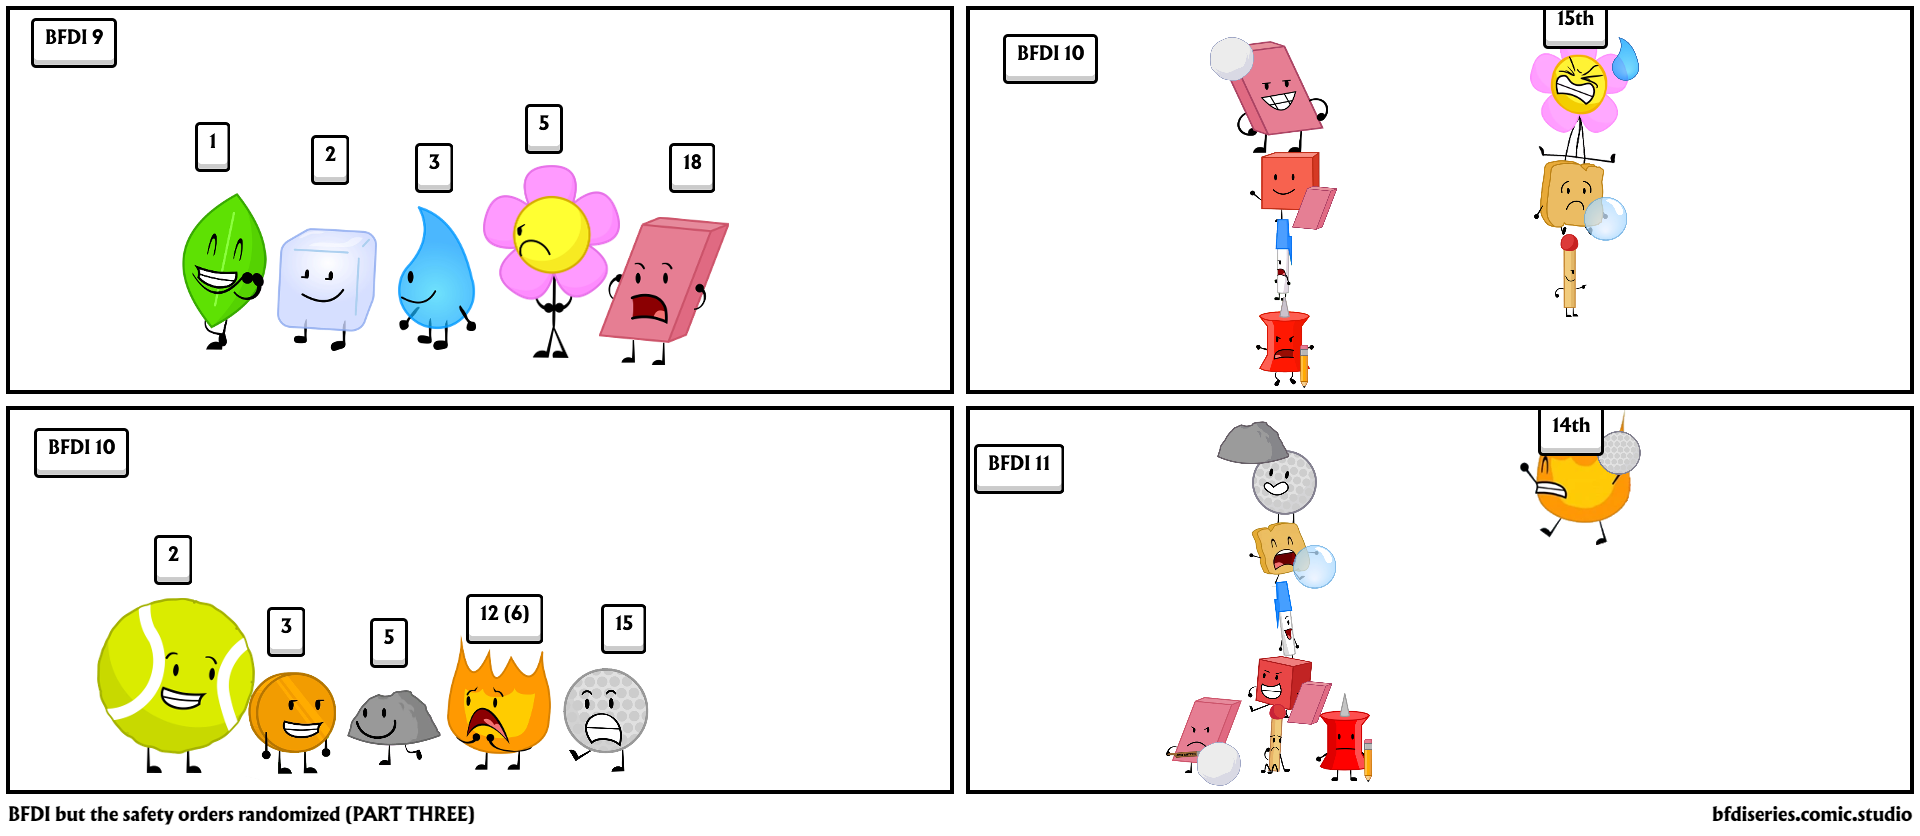 BFDI but the safety orders randomized (PART THREE)